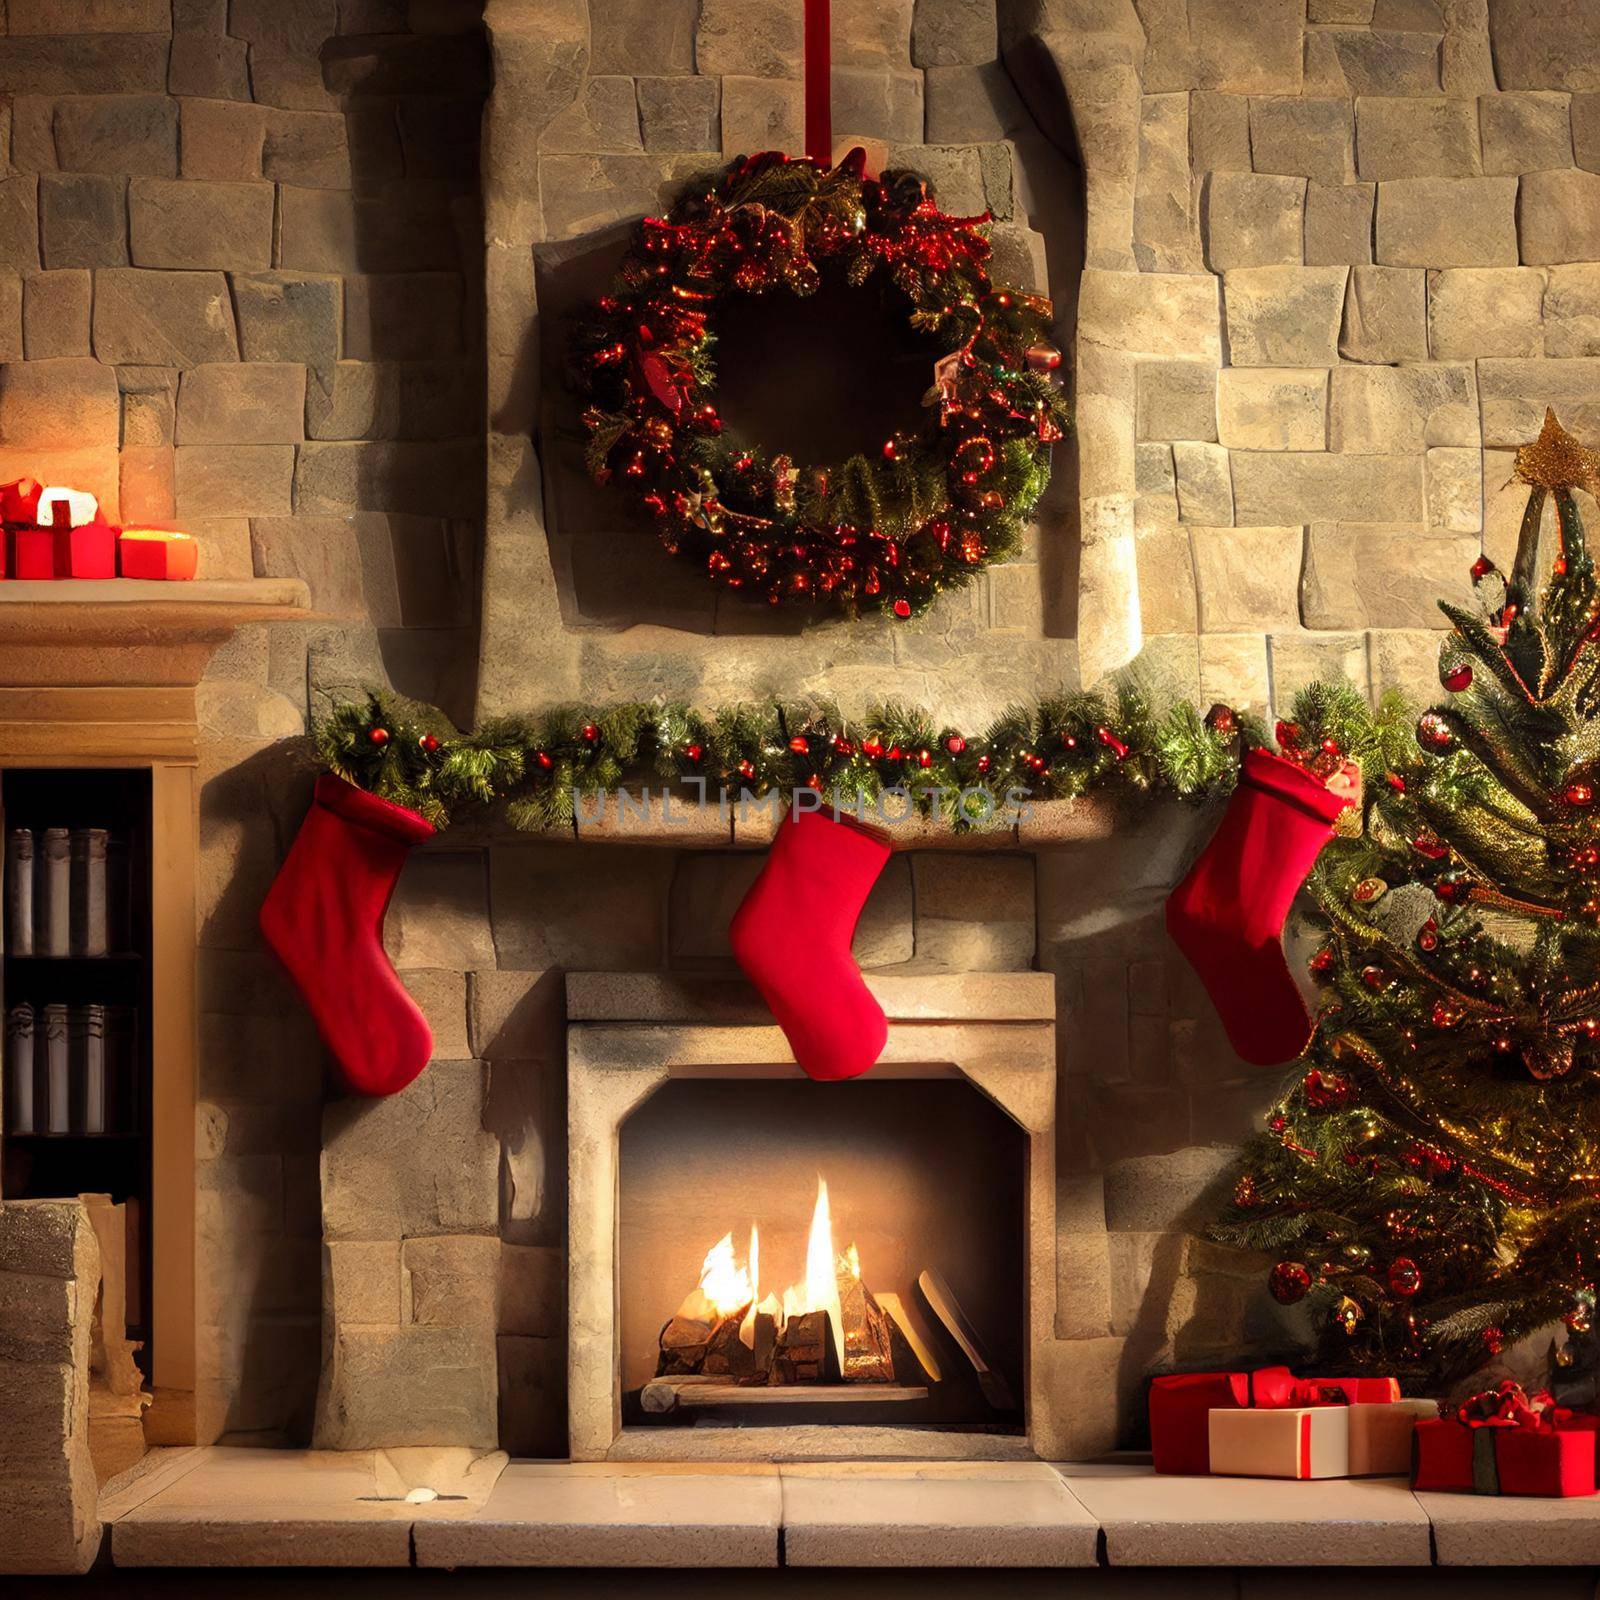 Stone fireplace decorated for Christmas by NeuroSky